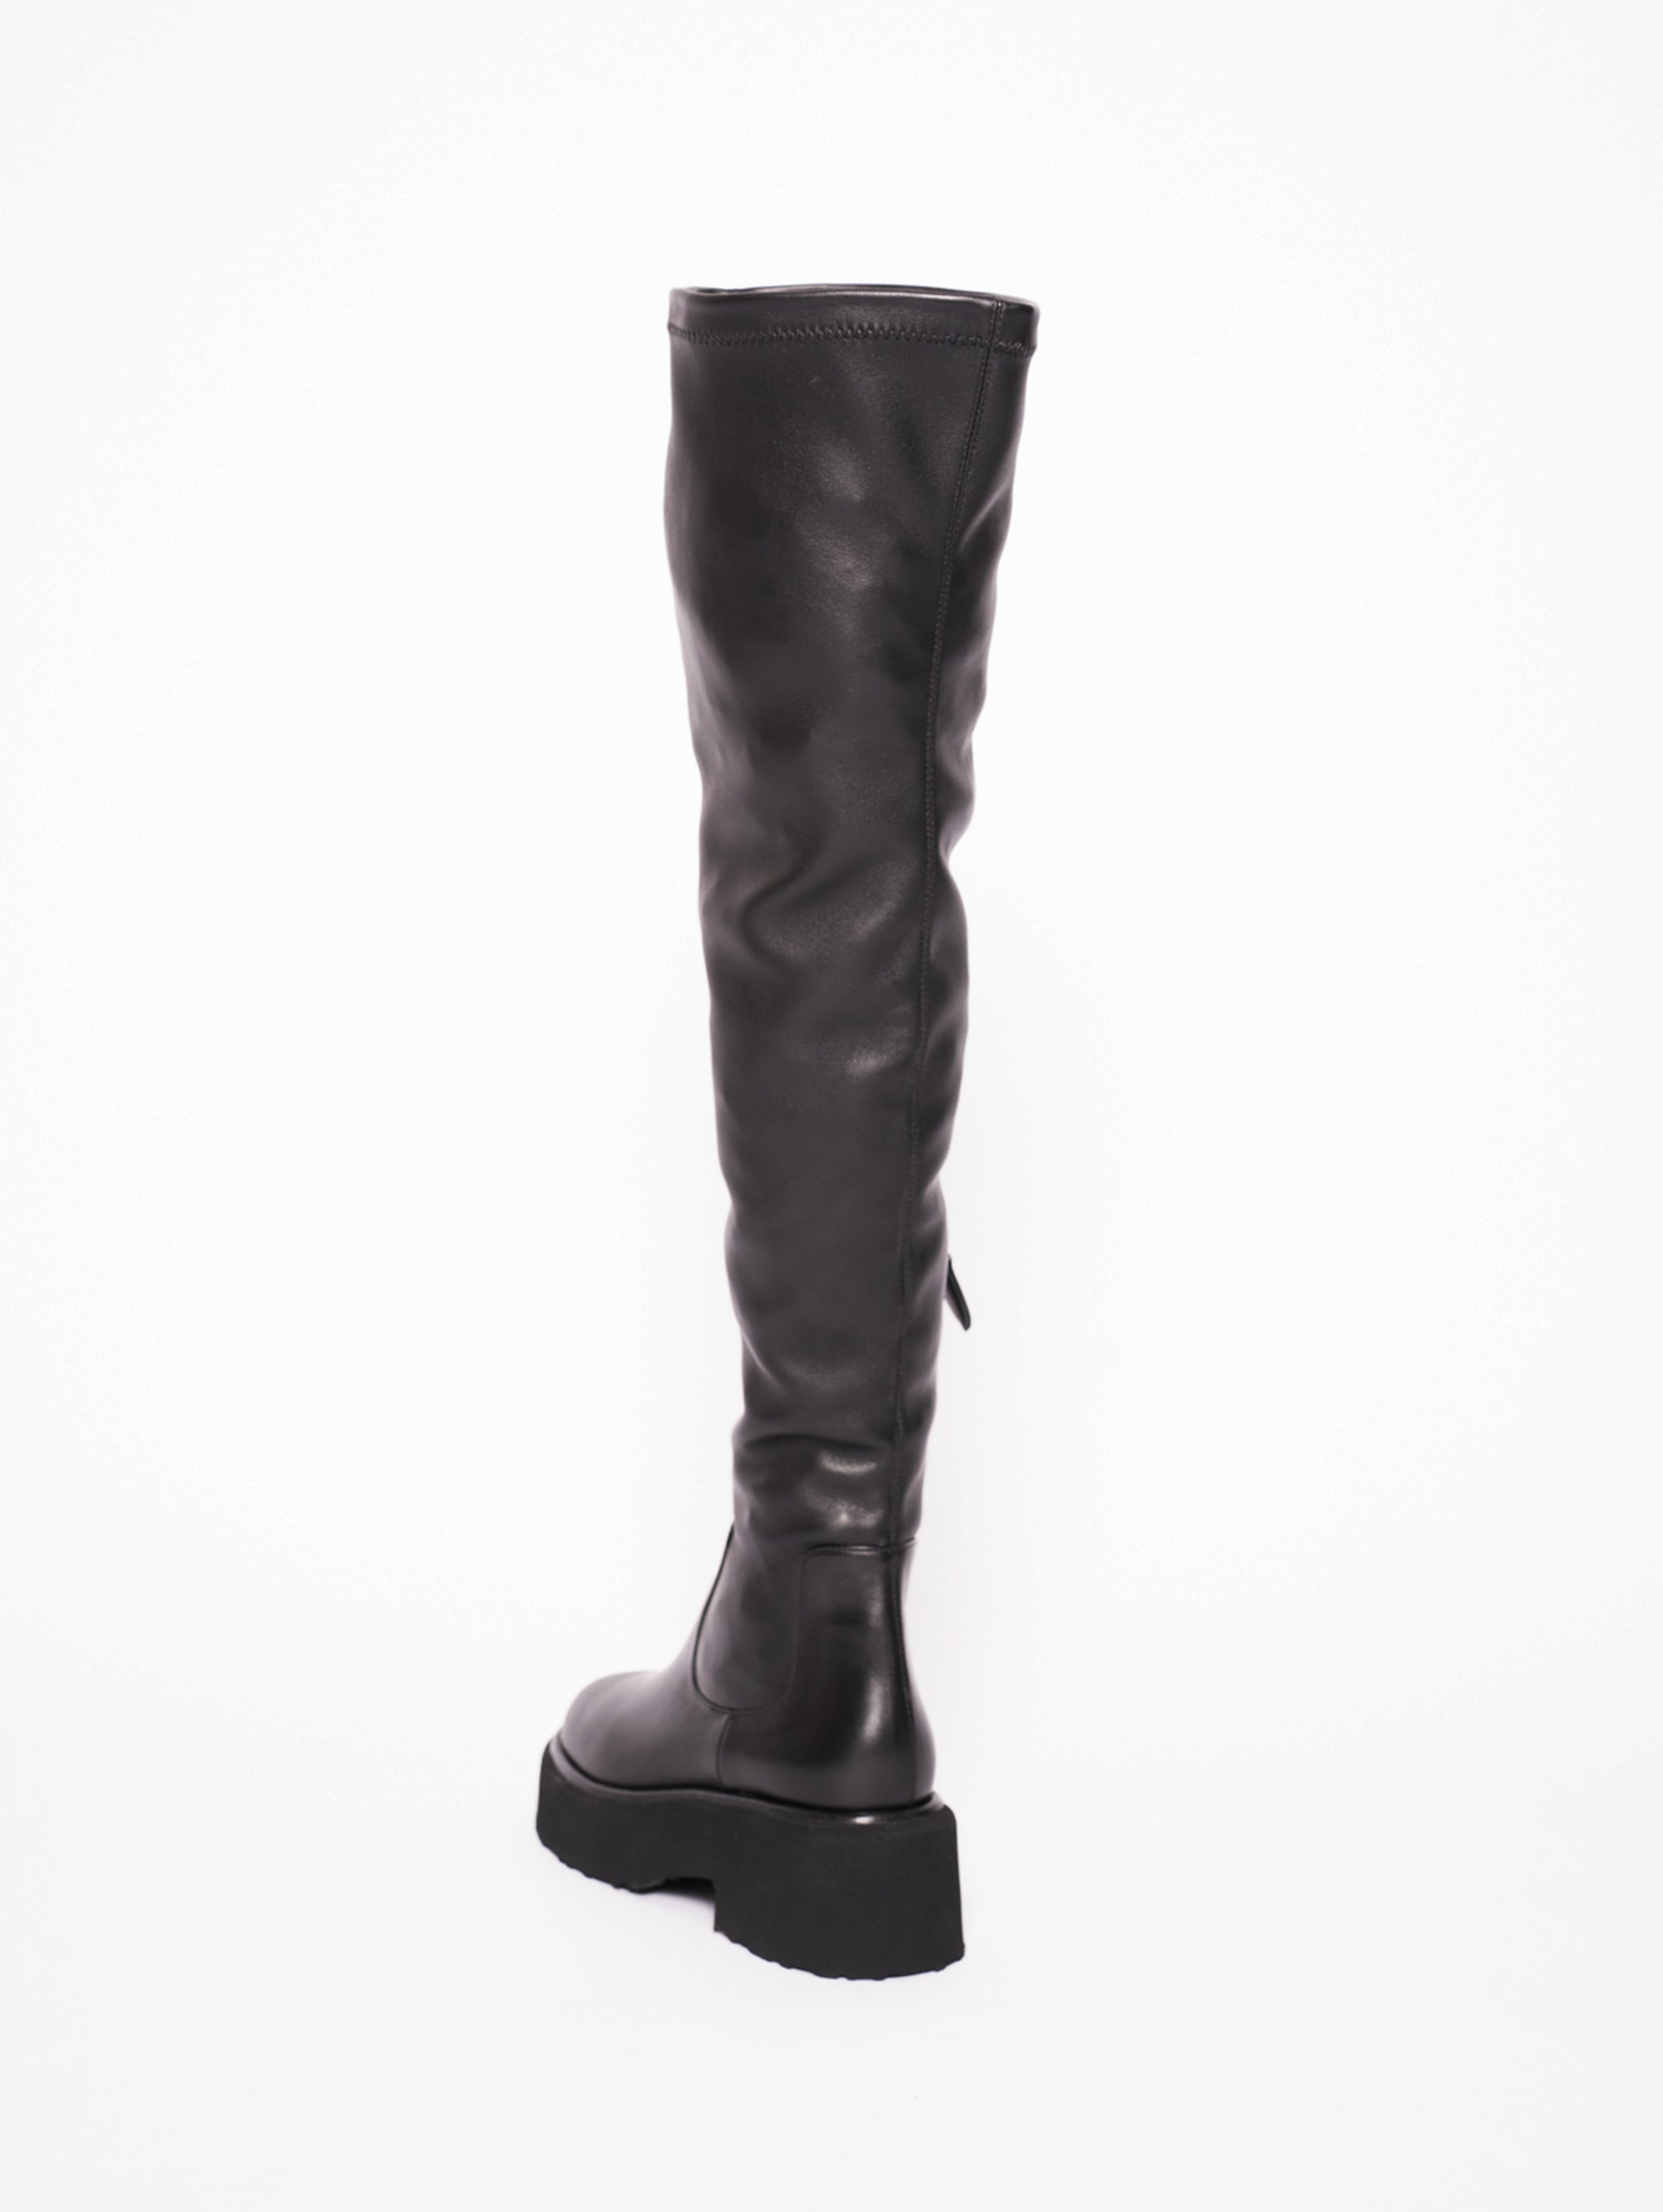 Boot with Black High Leg